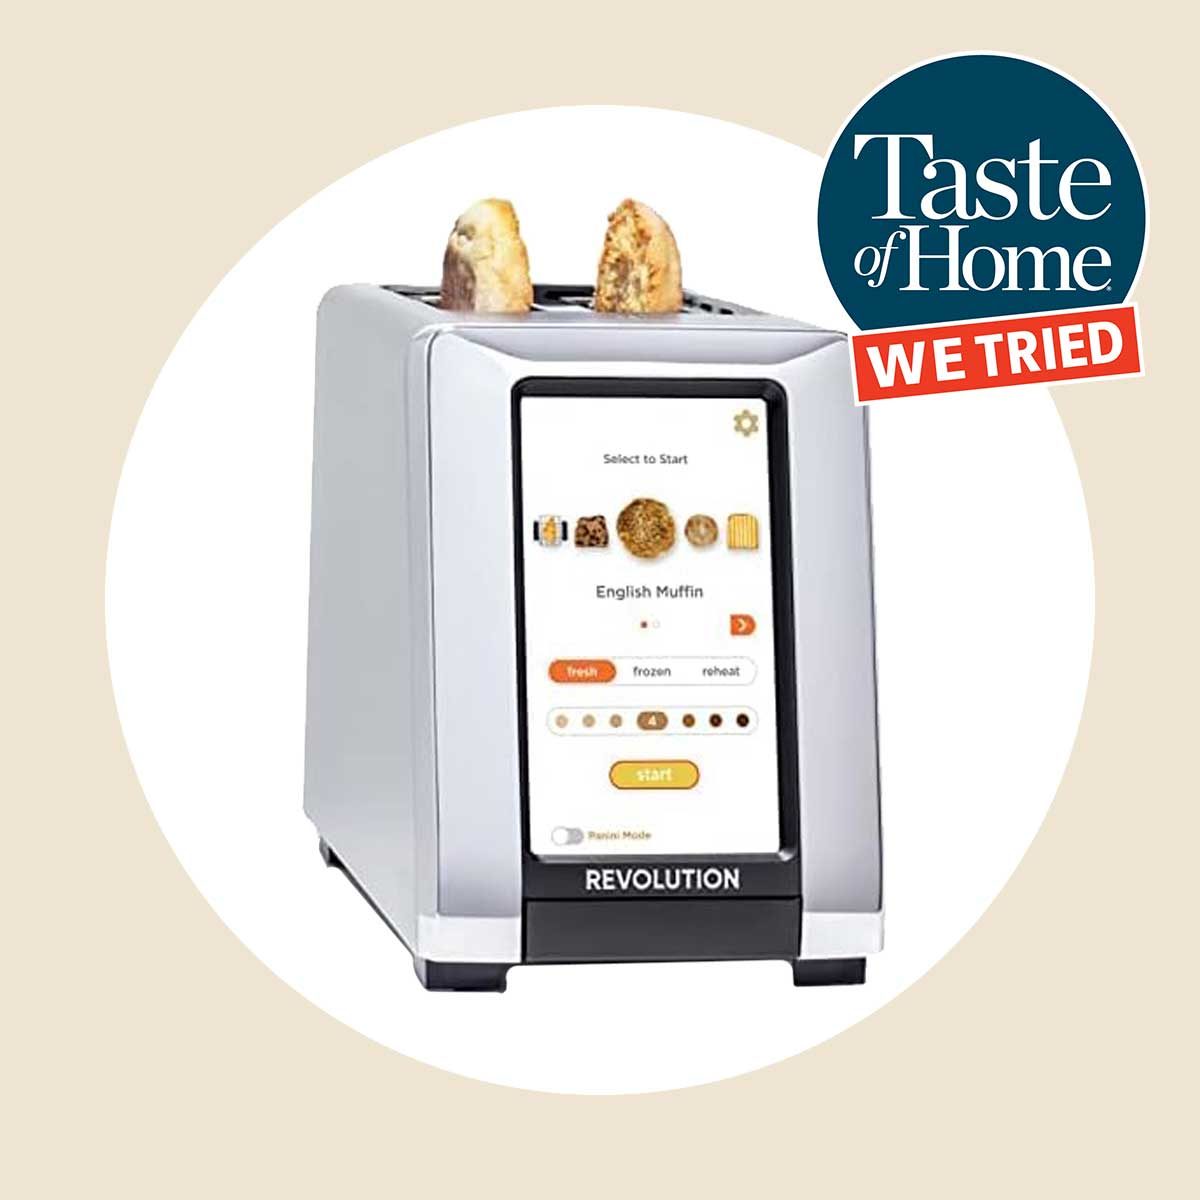 https://www.tasteofhome.com/wp-content/uploads/2022/11/TOH-We-Tried-touch-screen-toaster.jpg?fit=700%2C700